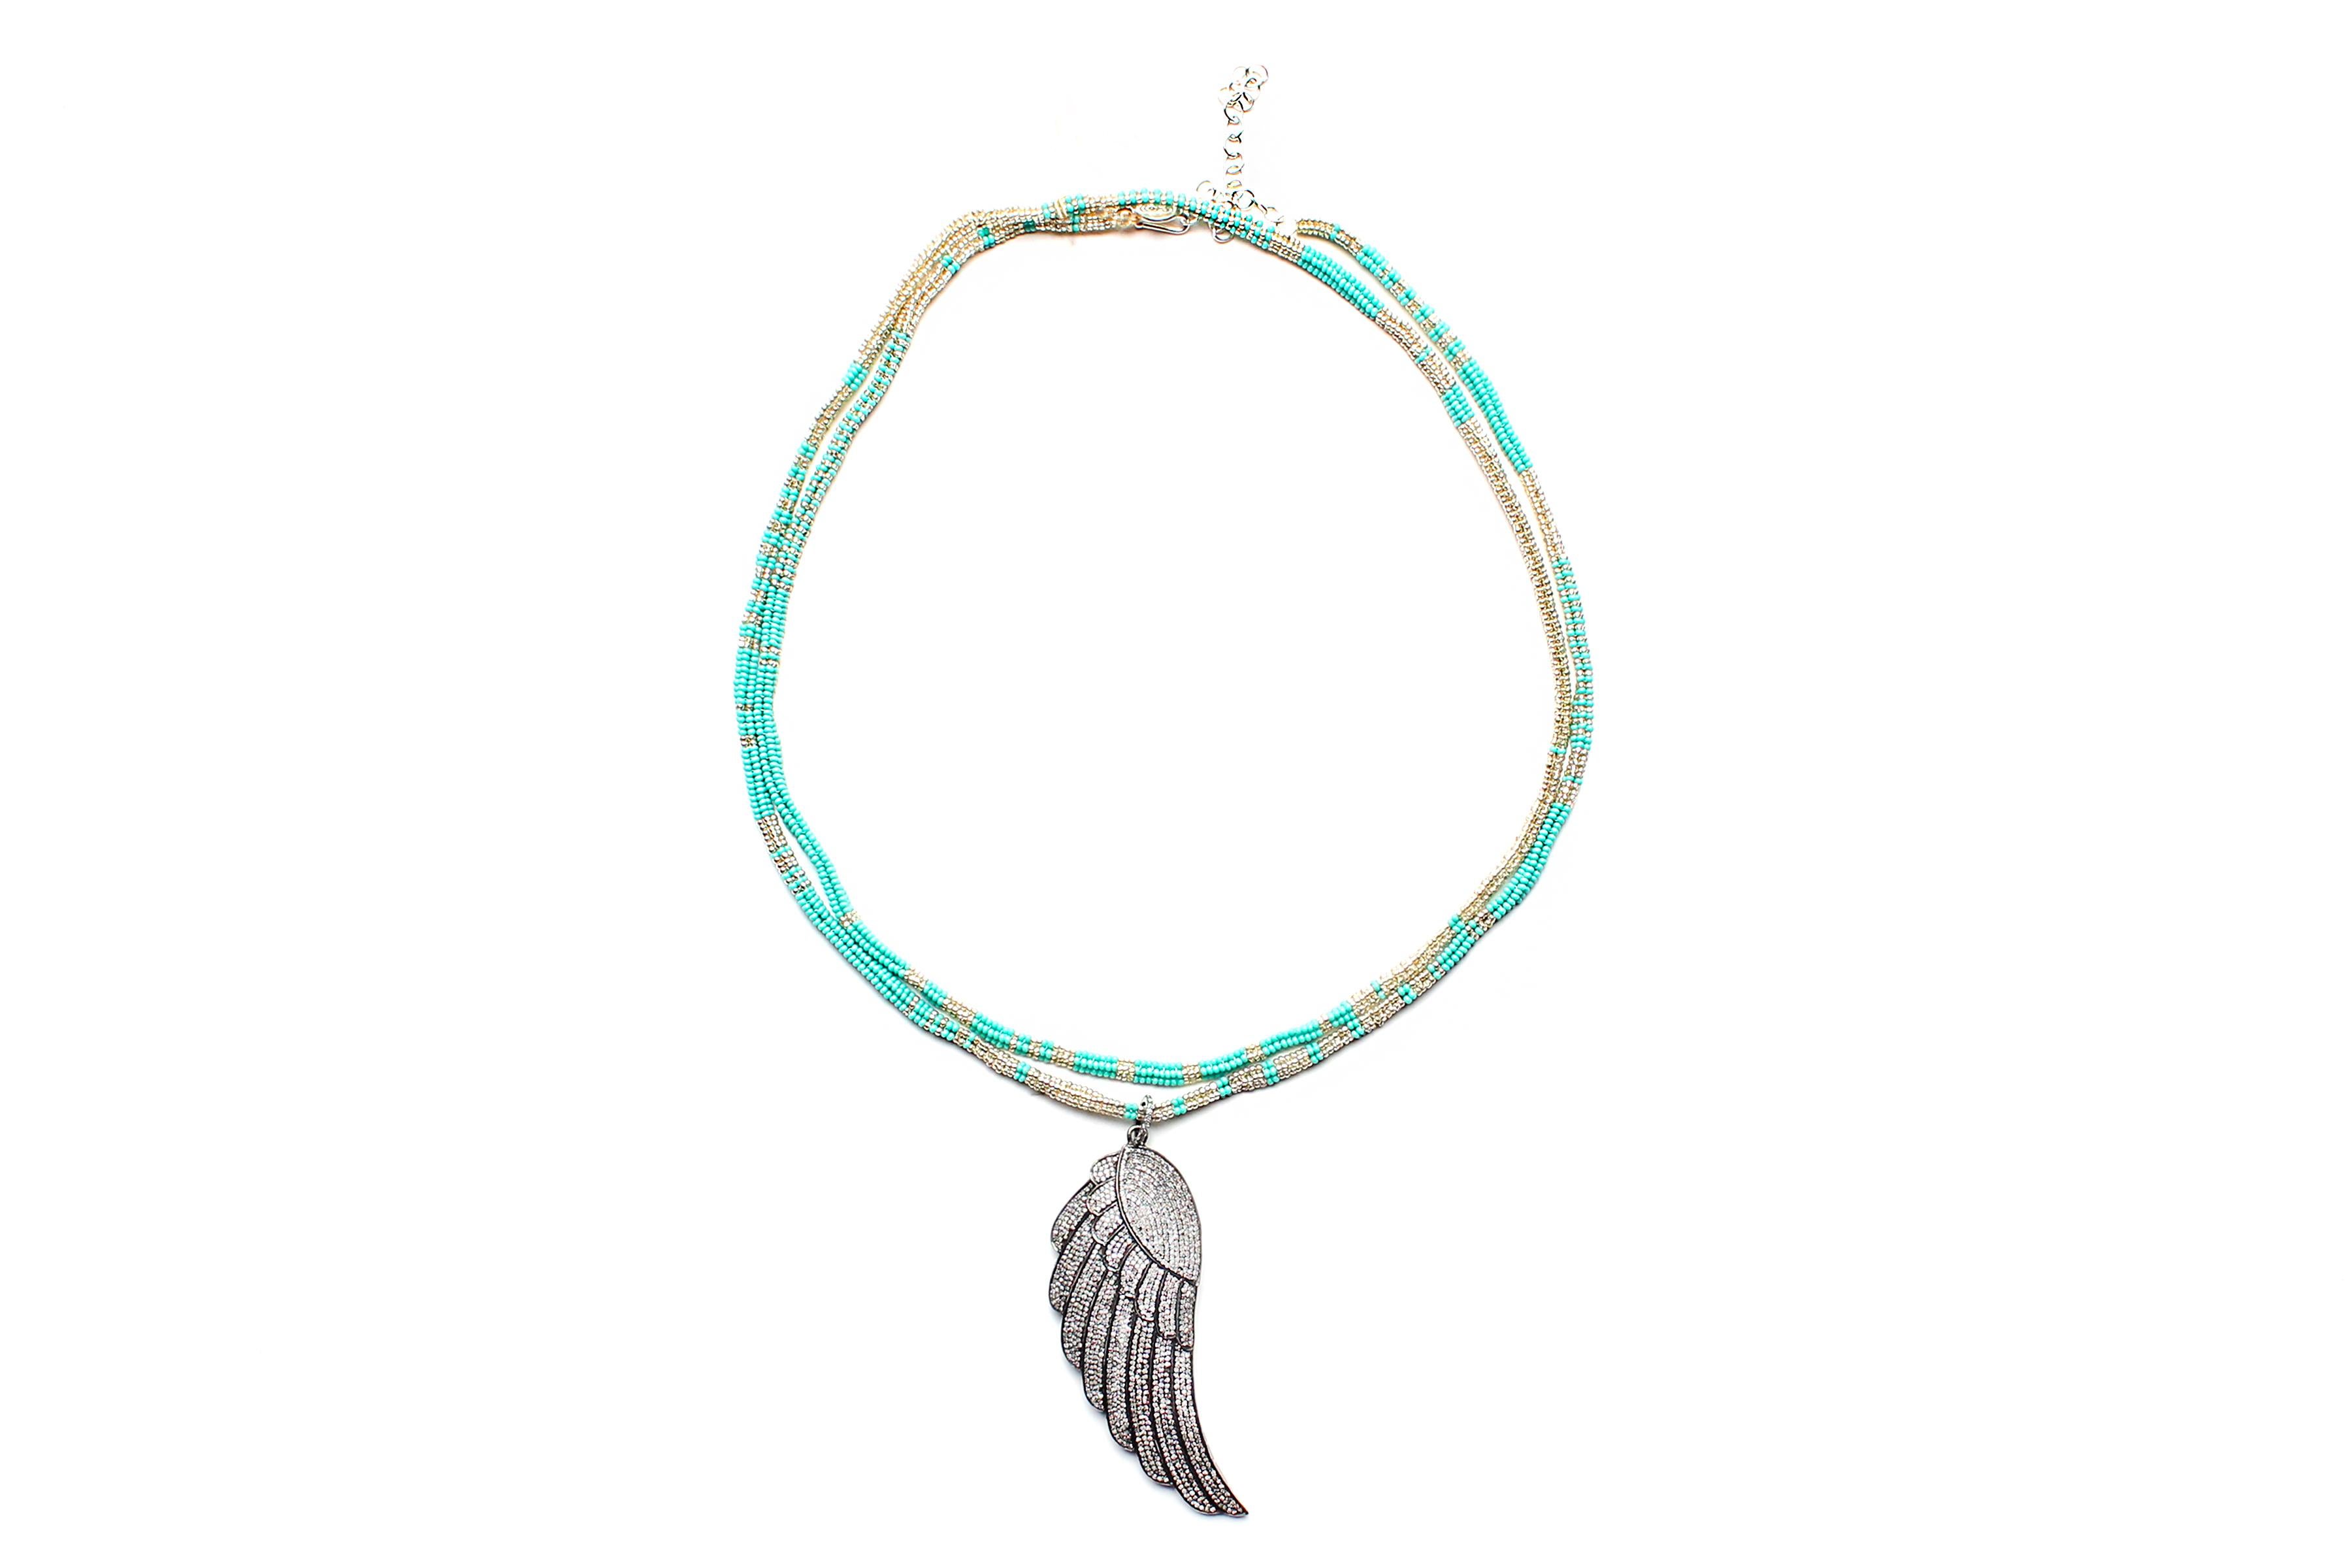 Contemporary CLARISSA BRONFMAN Turquoise Silver 